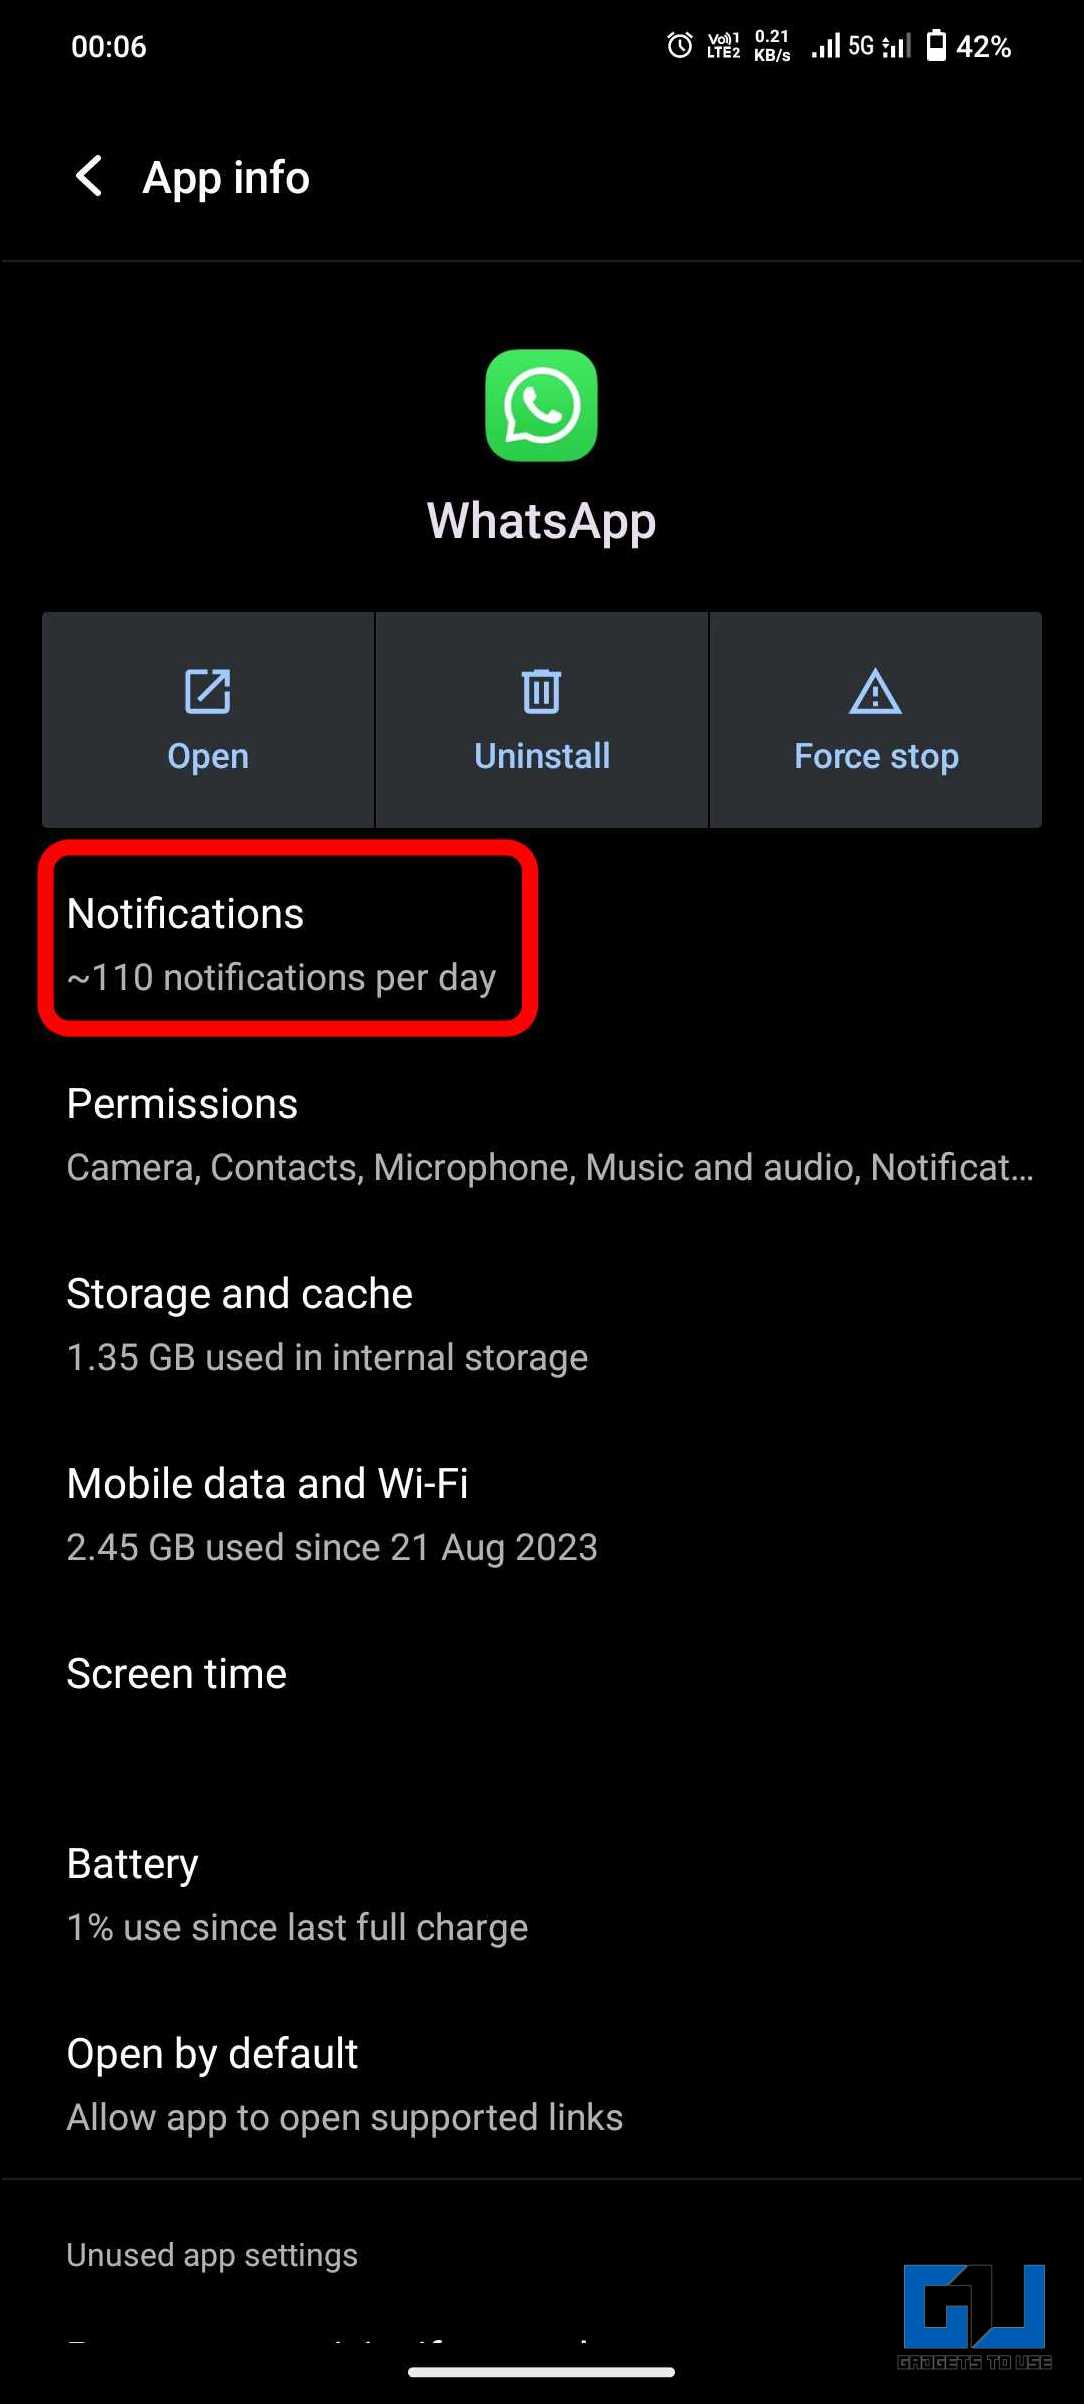 Go to Notifications settings of the app